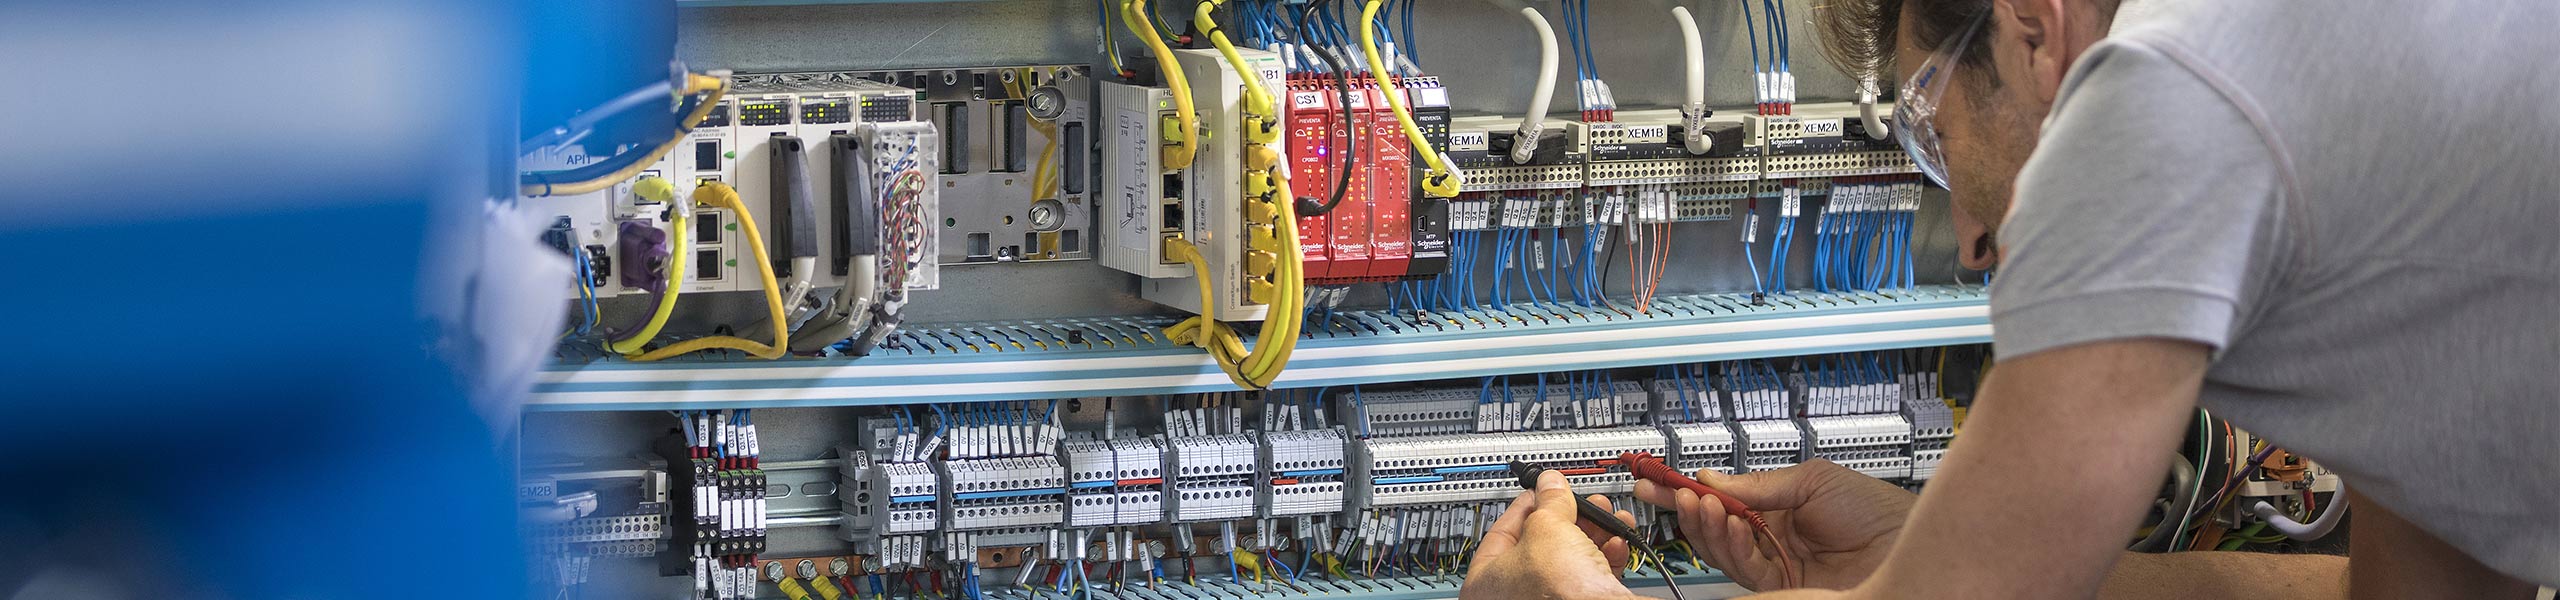 Man testing circuits inside an automation control panel